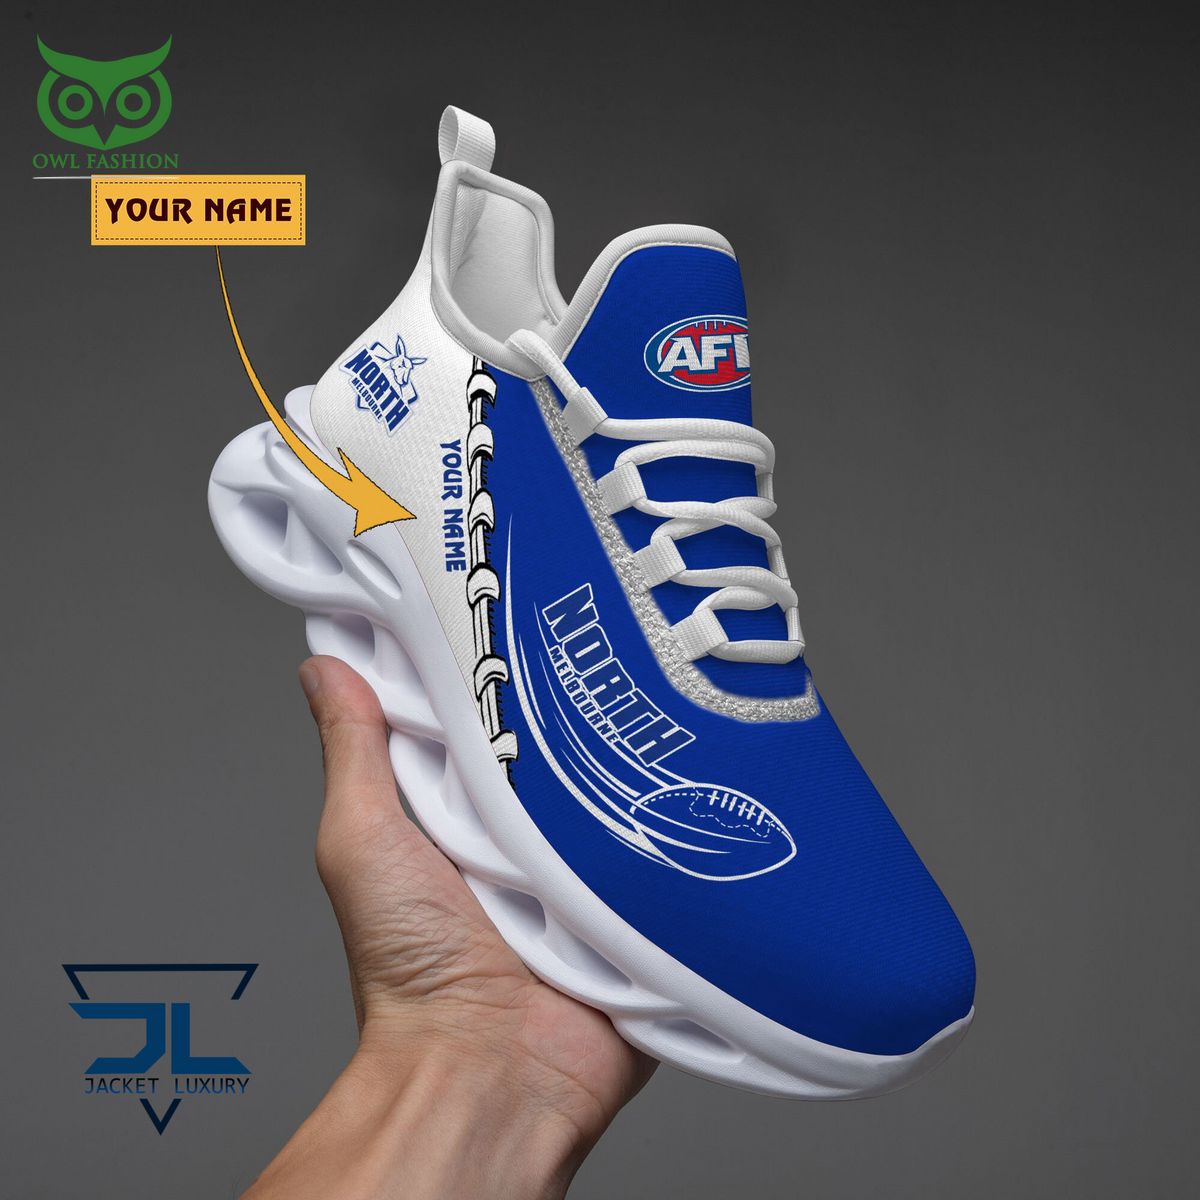 north melbourne football club afl personalized max soul shoes 1 Nsttv